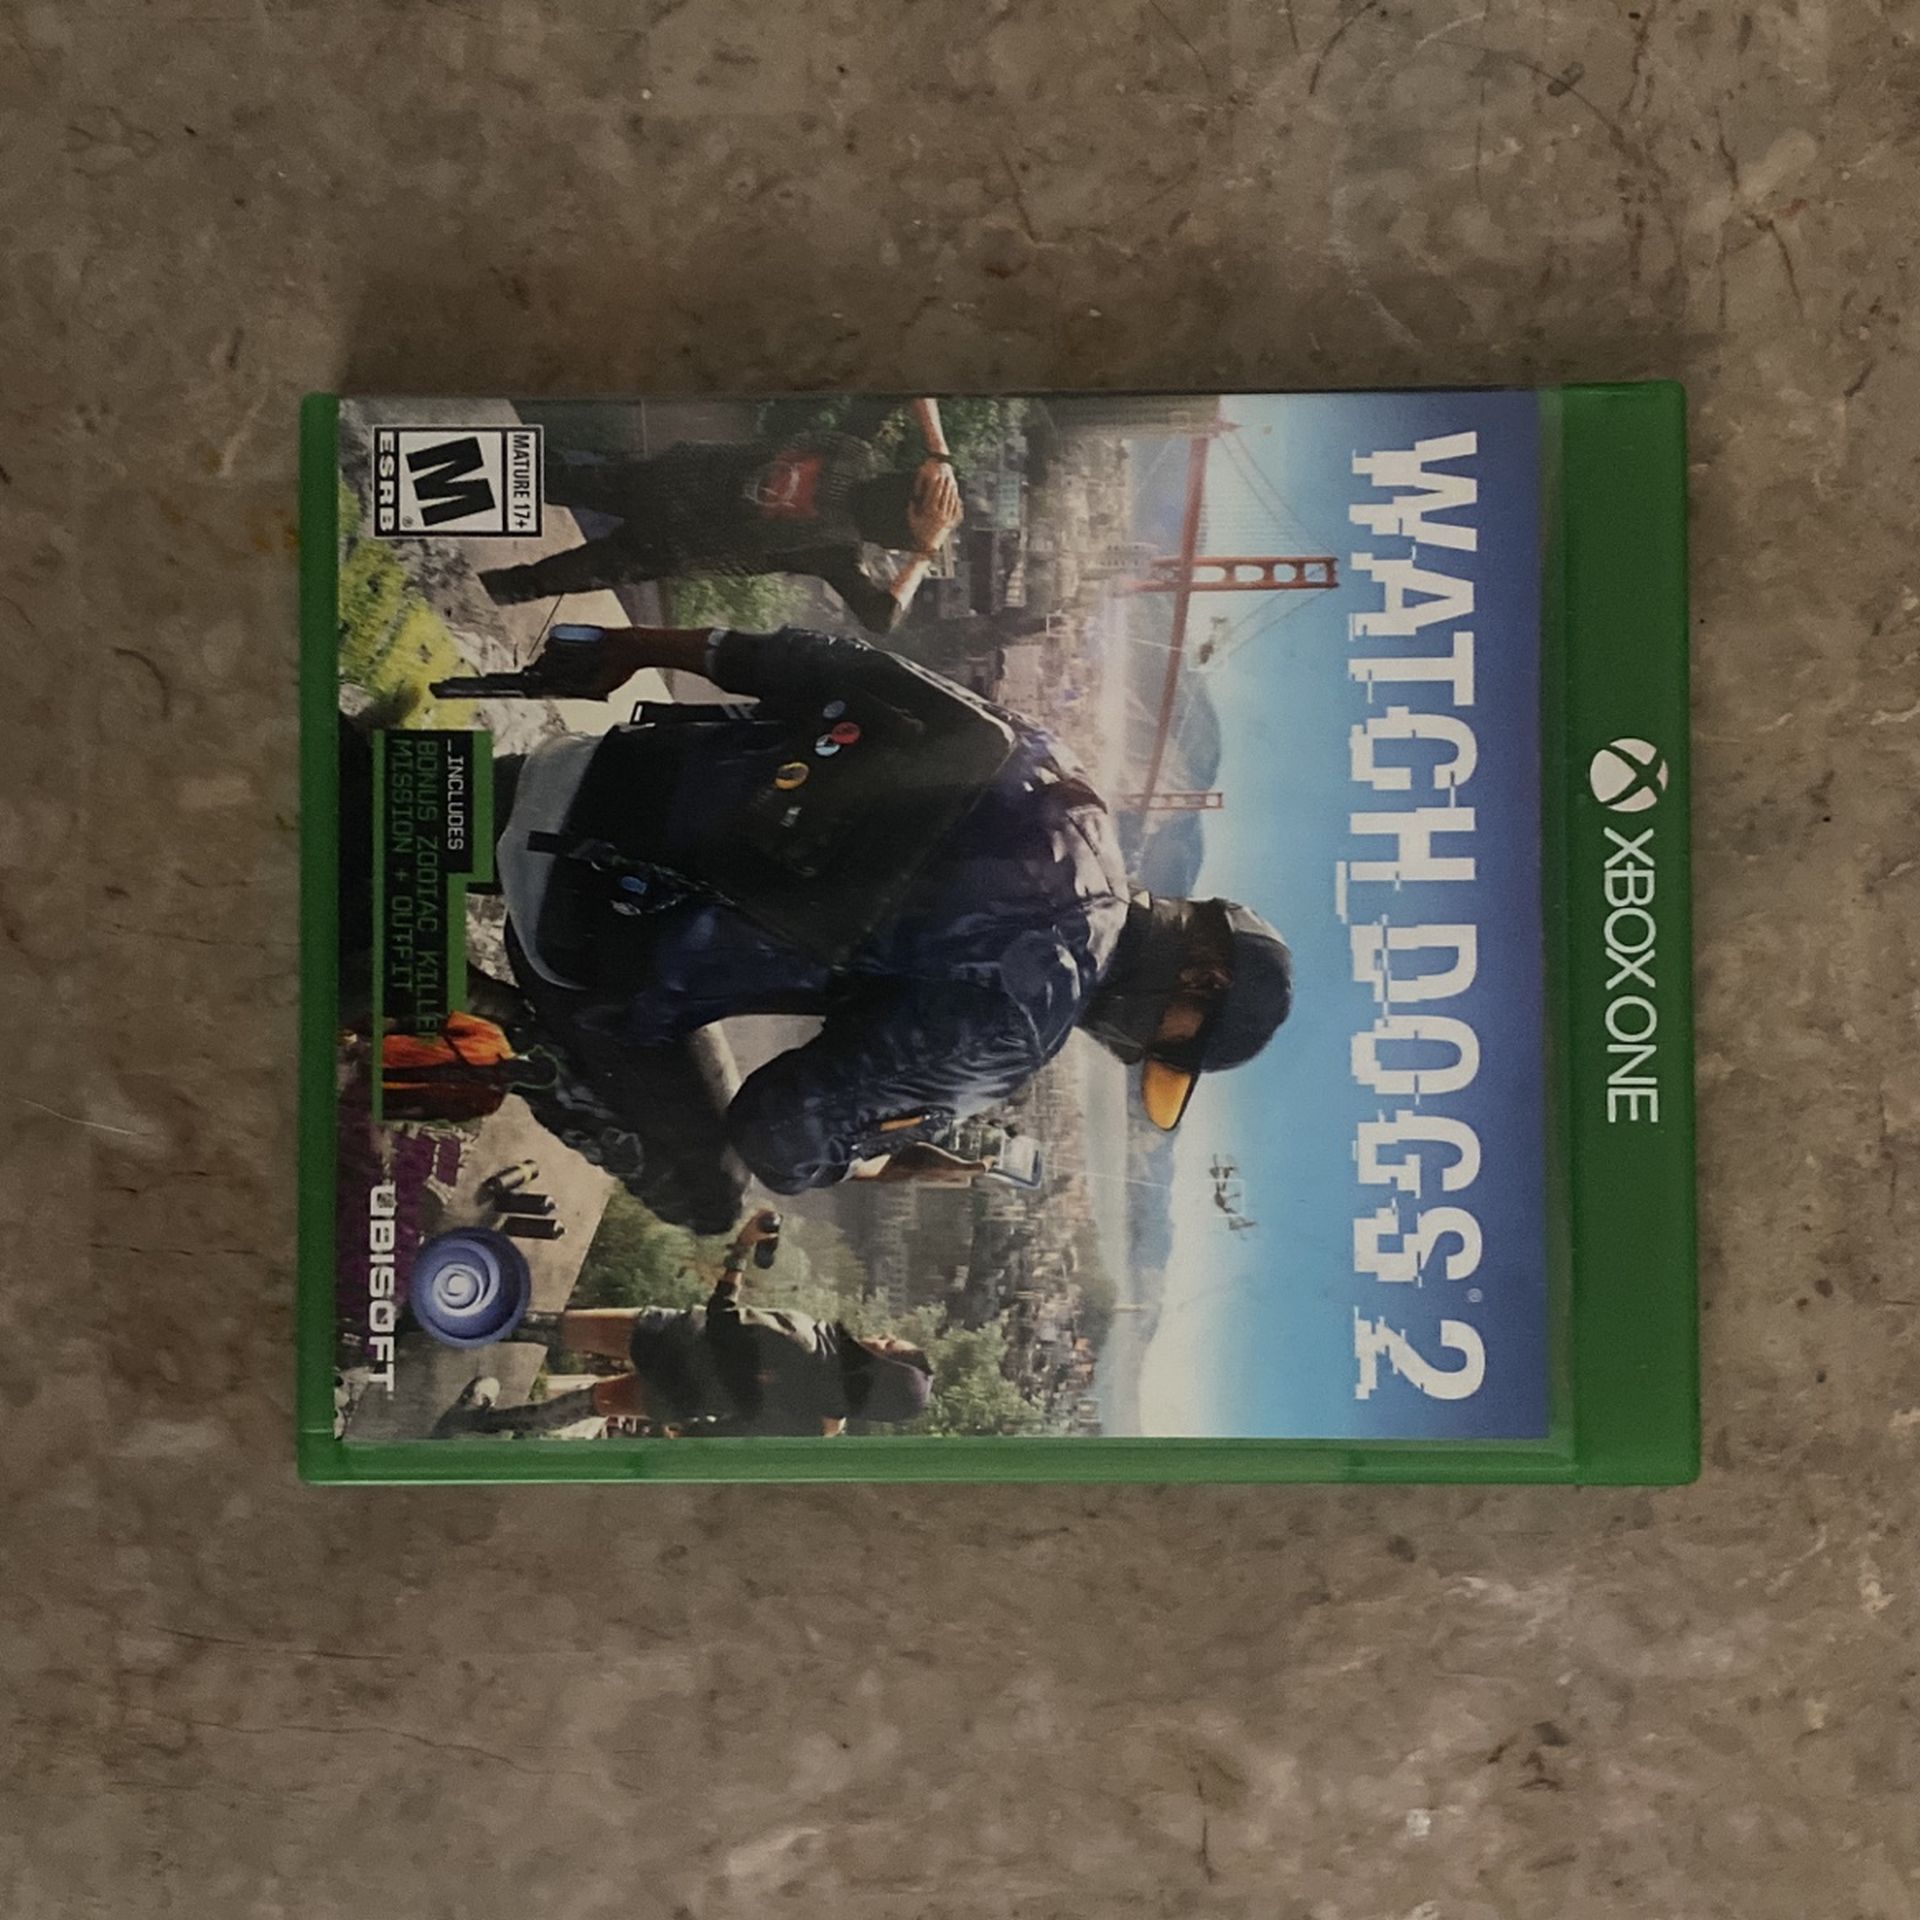 Watchdogs 2 Videogame Xbox One